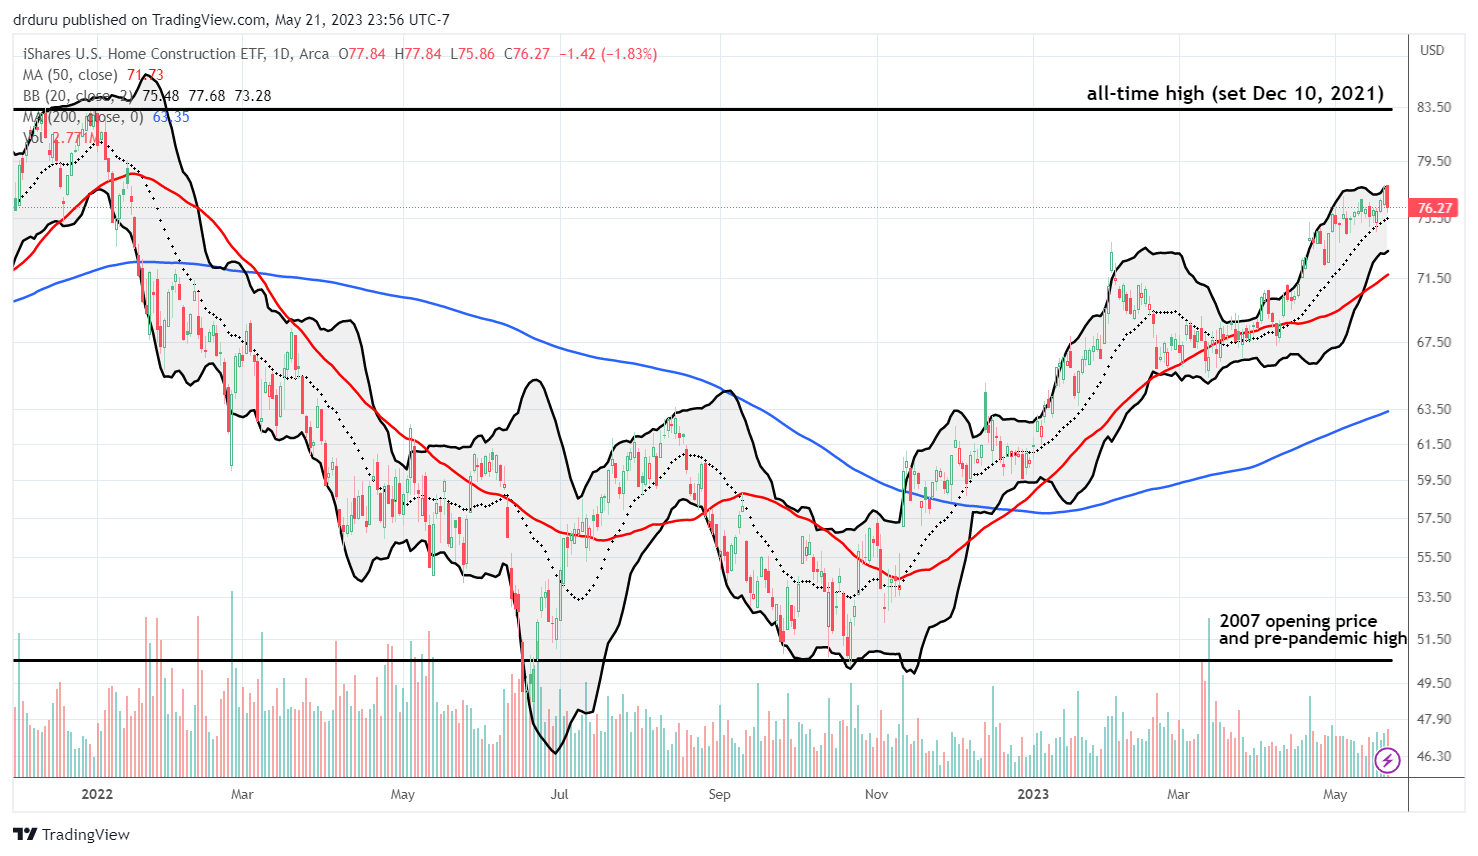 The iShares US Home Construction ETF (ITB) is riding a strong uptrend in place since its 200DMA breakout in November.